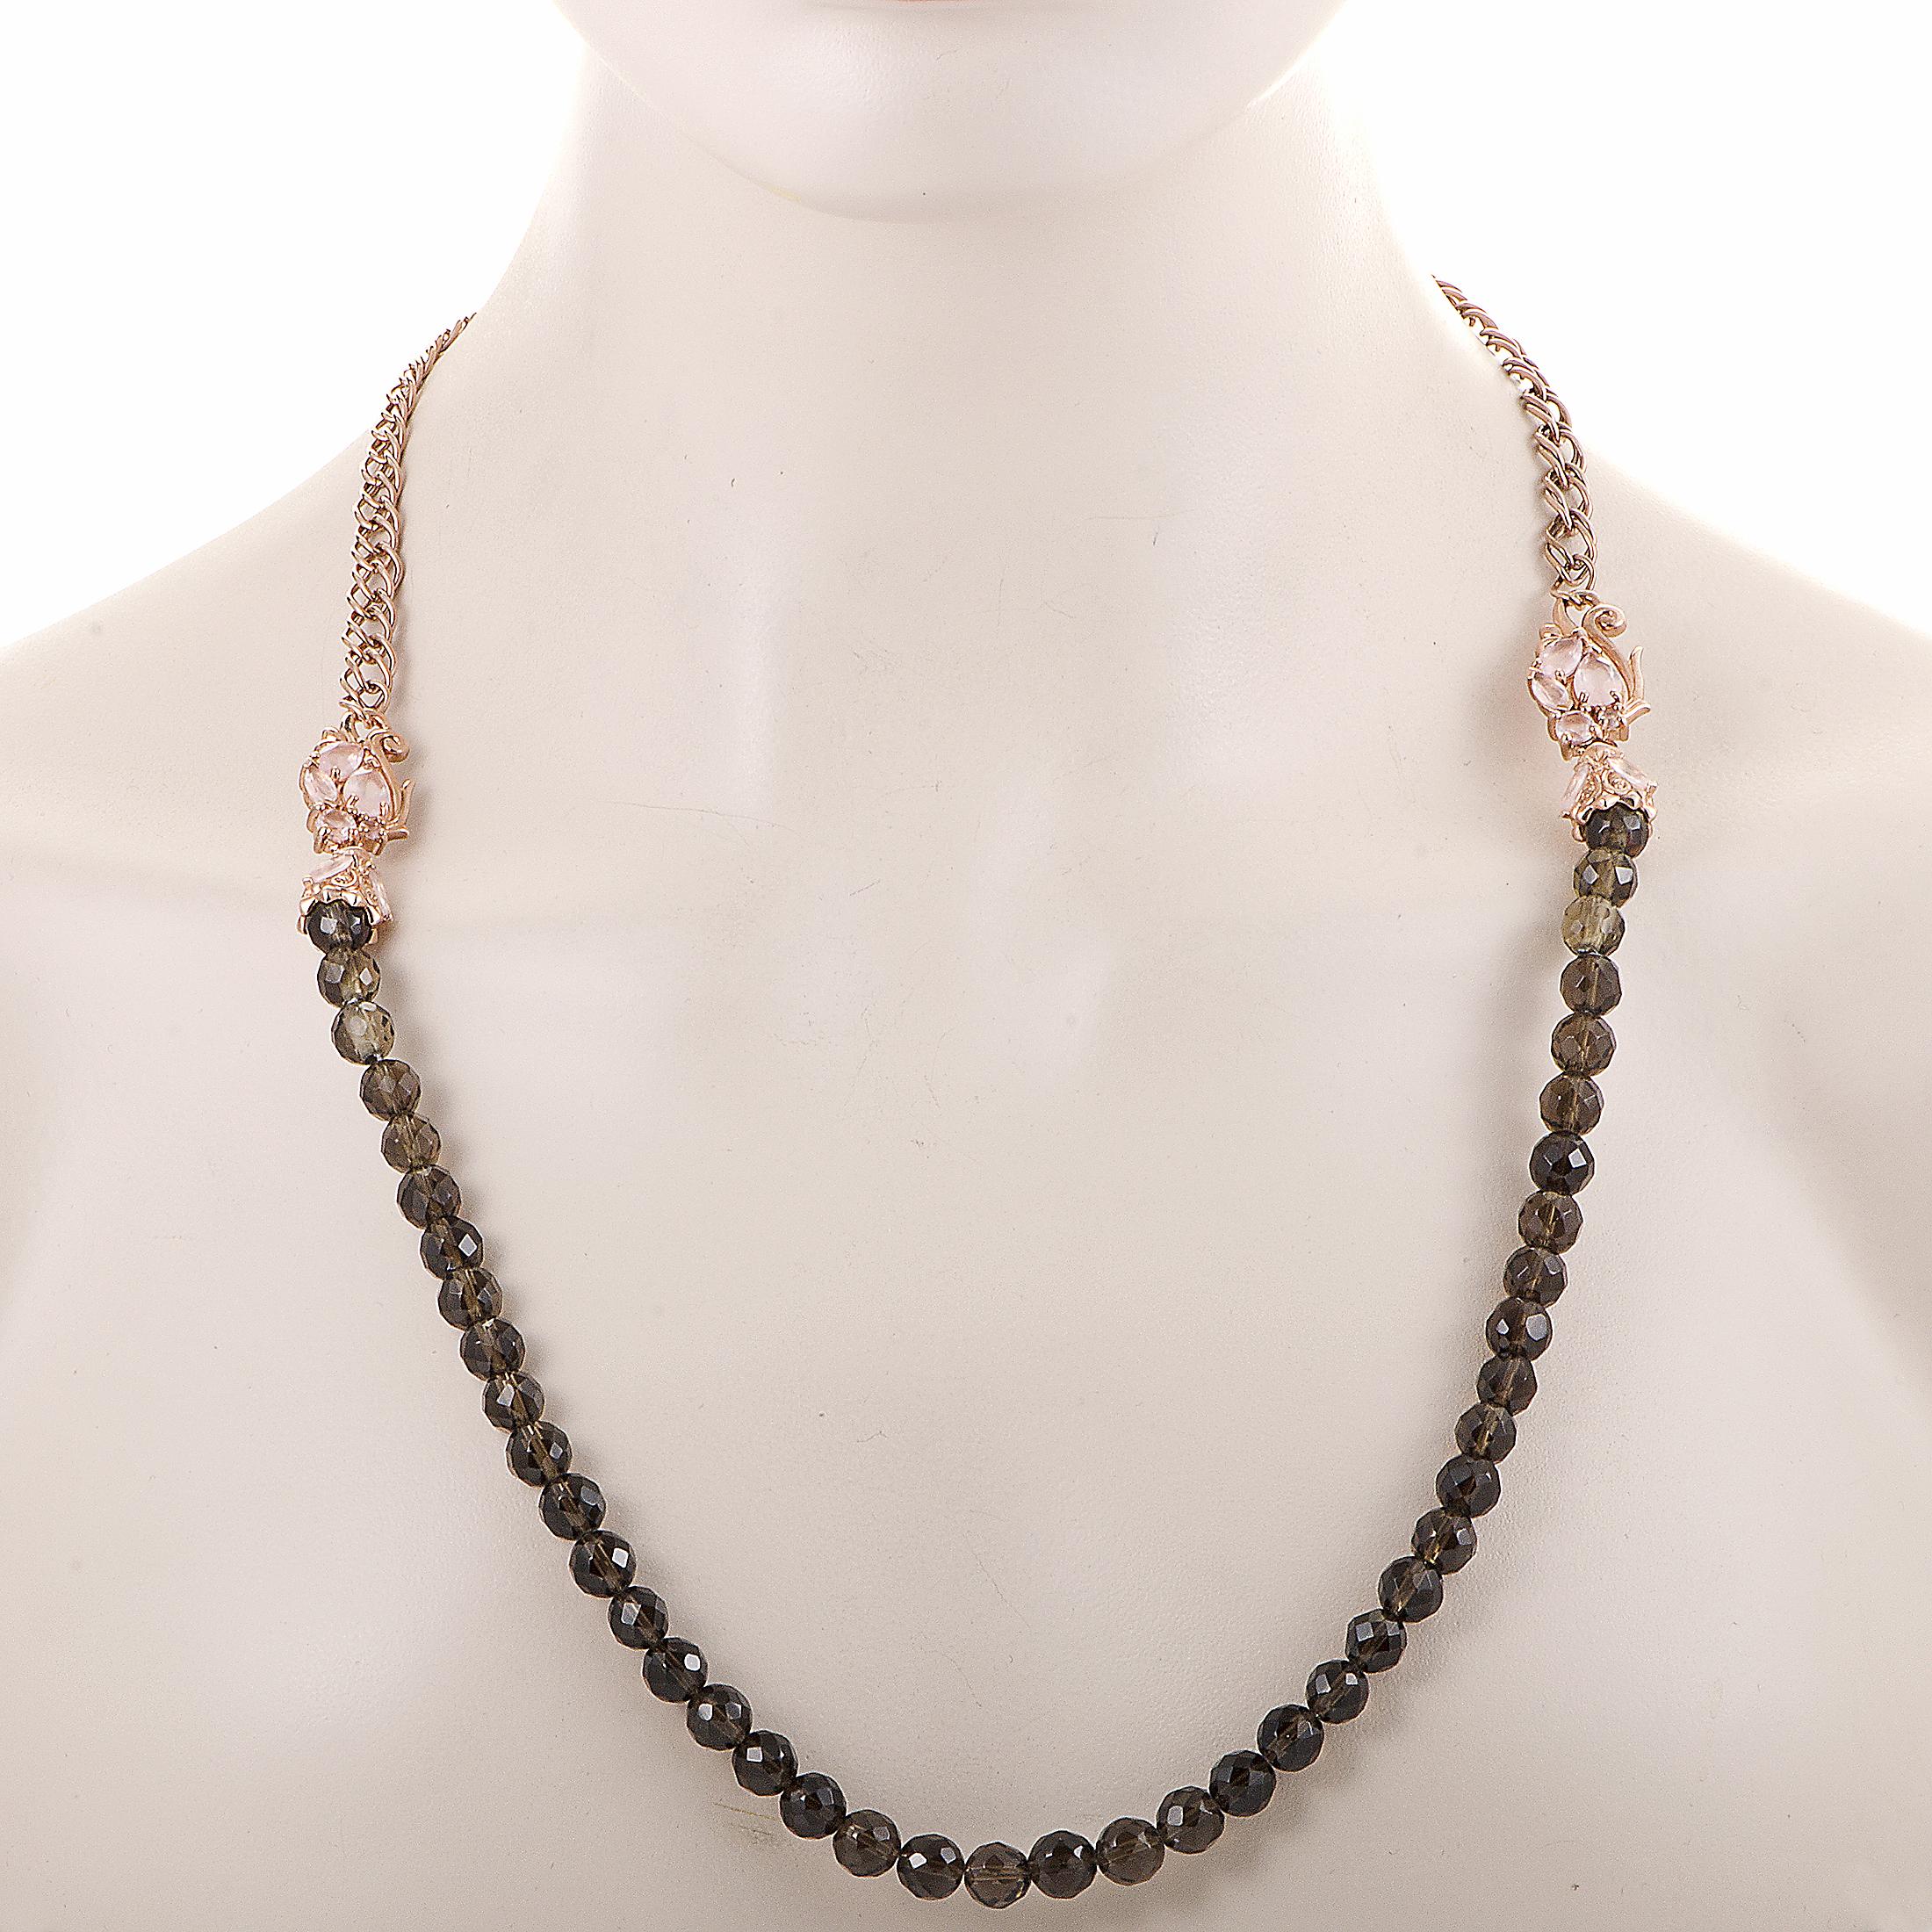 Extraordinarily intricate decorative work and tasteful exuberance produce an irresistible allure in this spellbinding rose gold-plated silver necklace from Stephen Webster's 